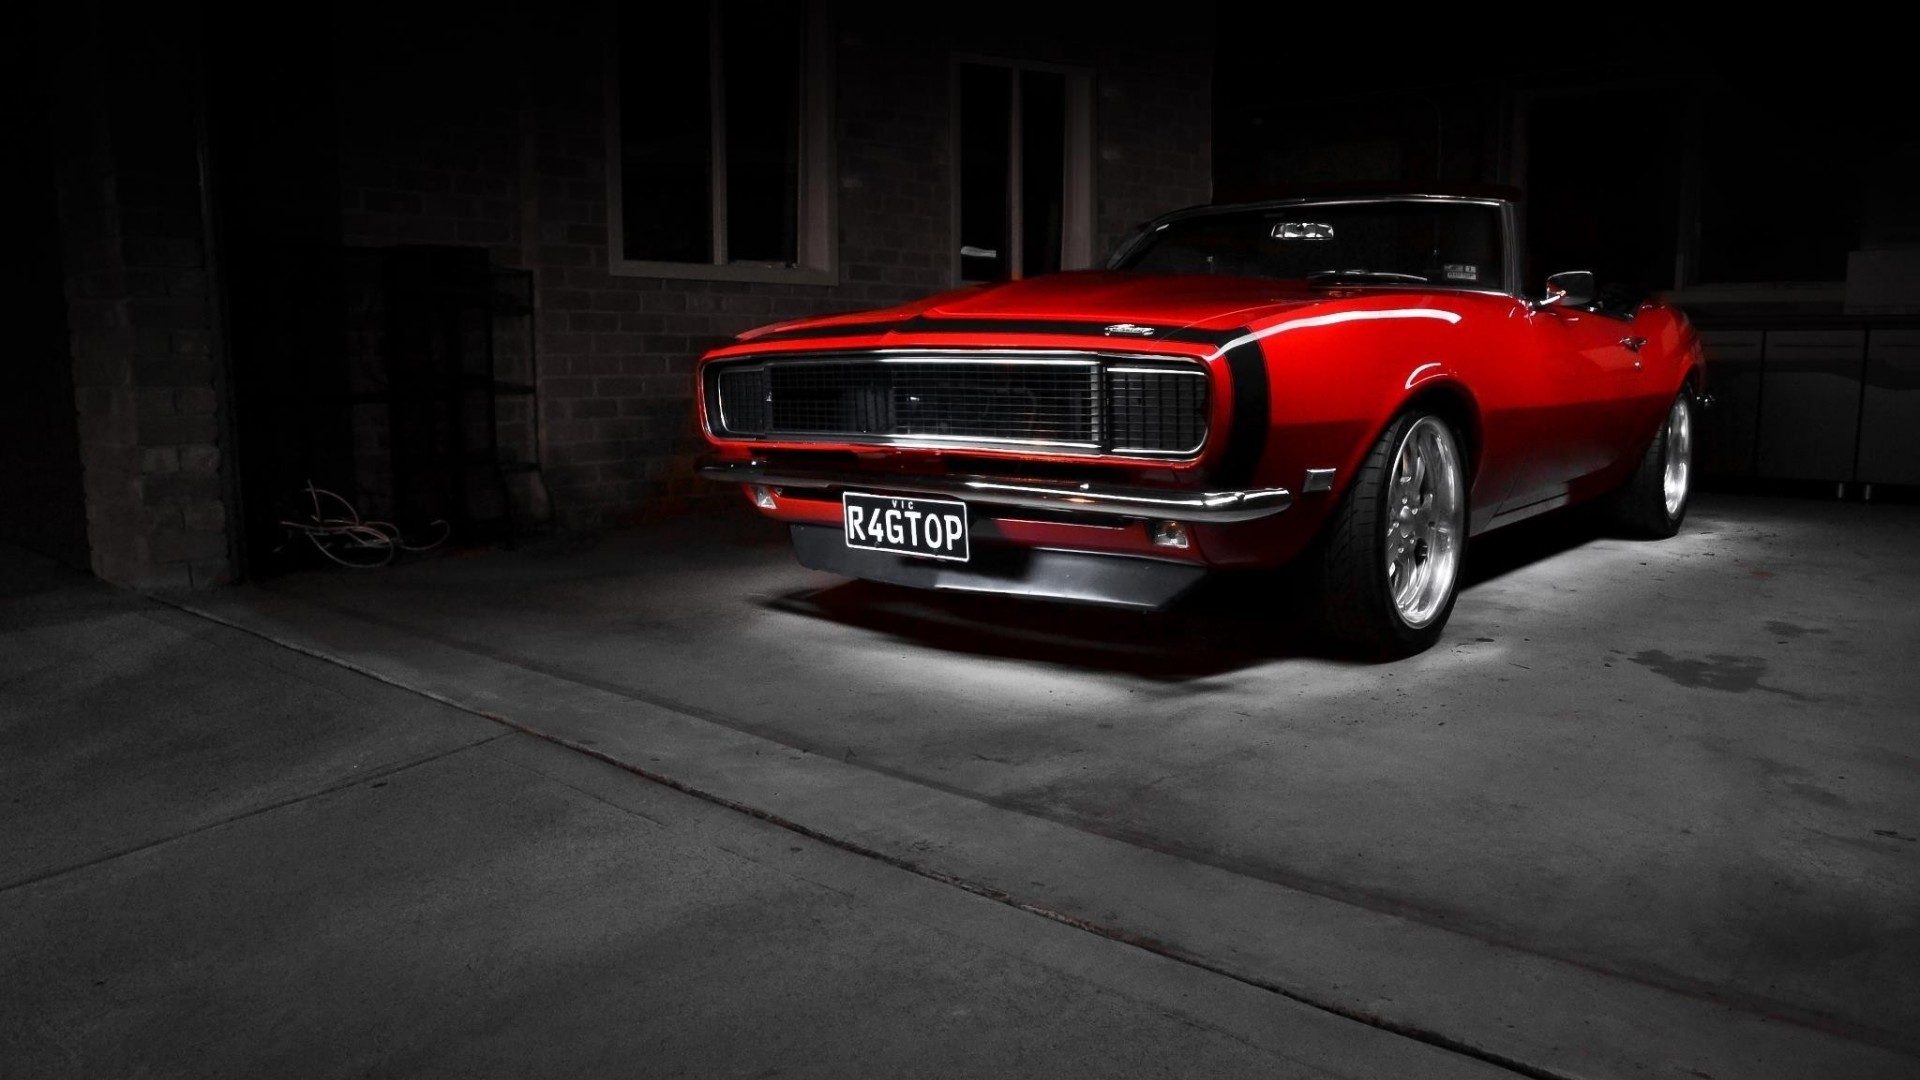 1920x1080 Title : cars muscle cars wallpapers (desktop, phone, tablet) – awesome.  Dimension : 1920 x 1080. File Type : JPG/JPEG